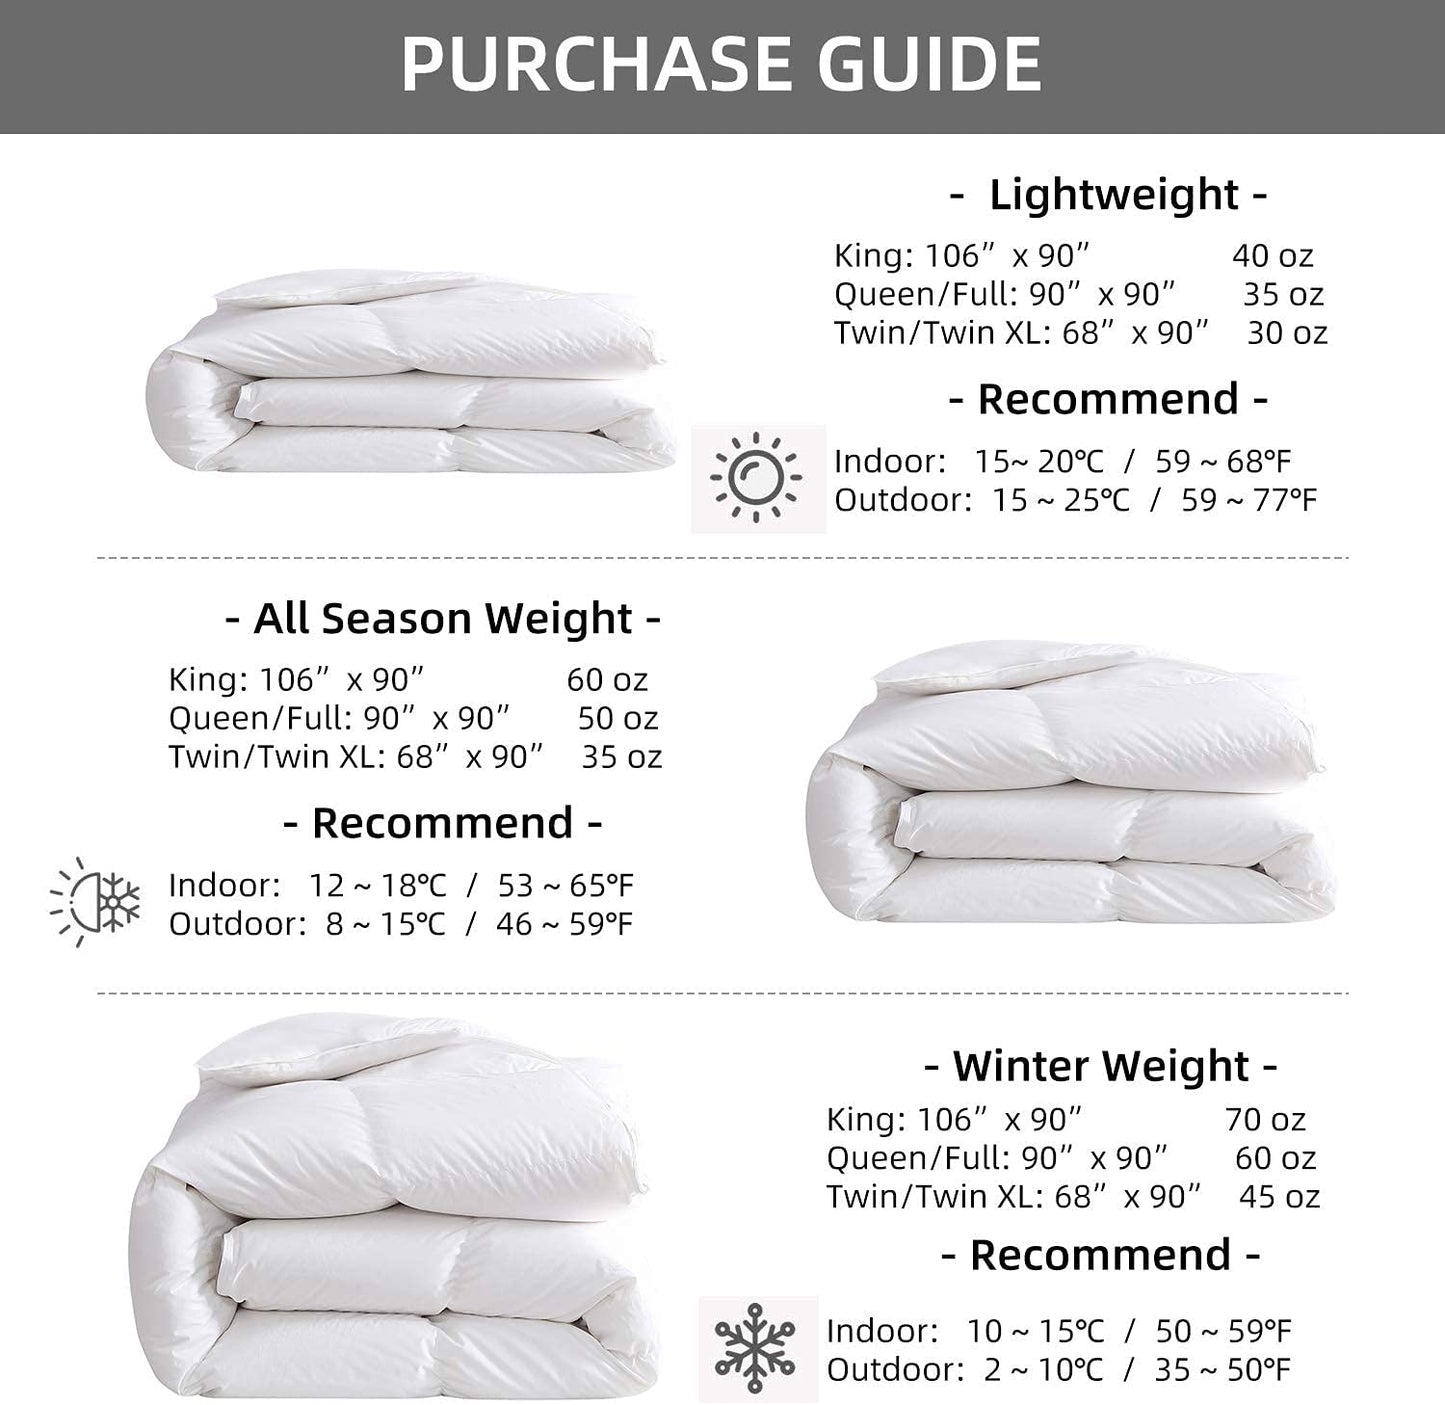 Premium Greyduck Feathers down Comforter King Size All Season Medium Warmth Solid White 100% Cotton Cover down Proof Duvet Insert with Corner Tabs, 60 Oz